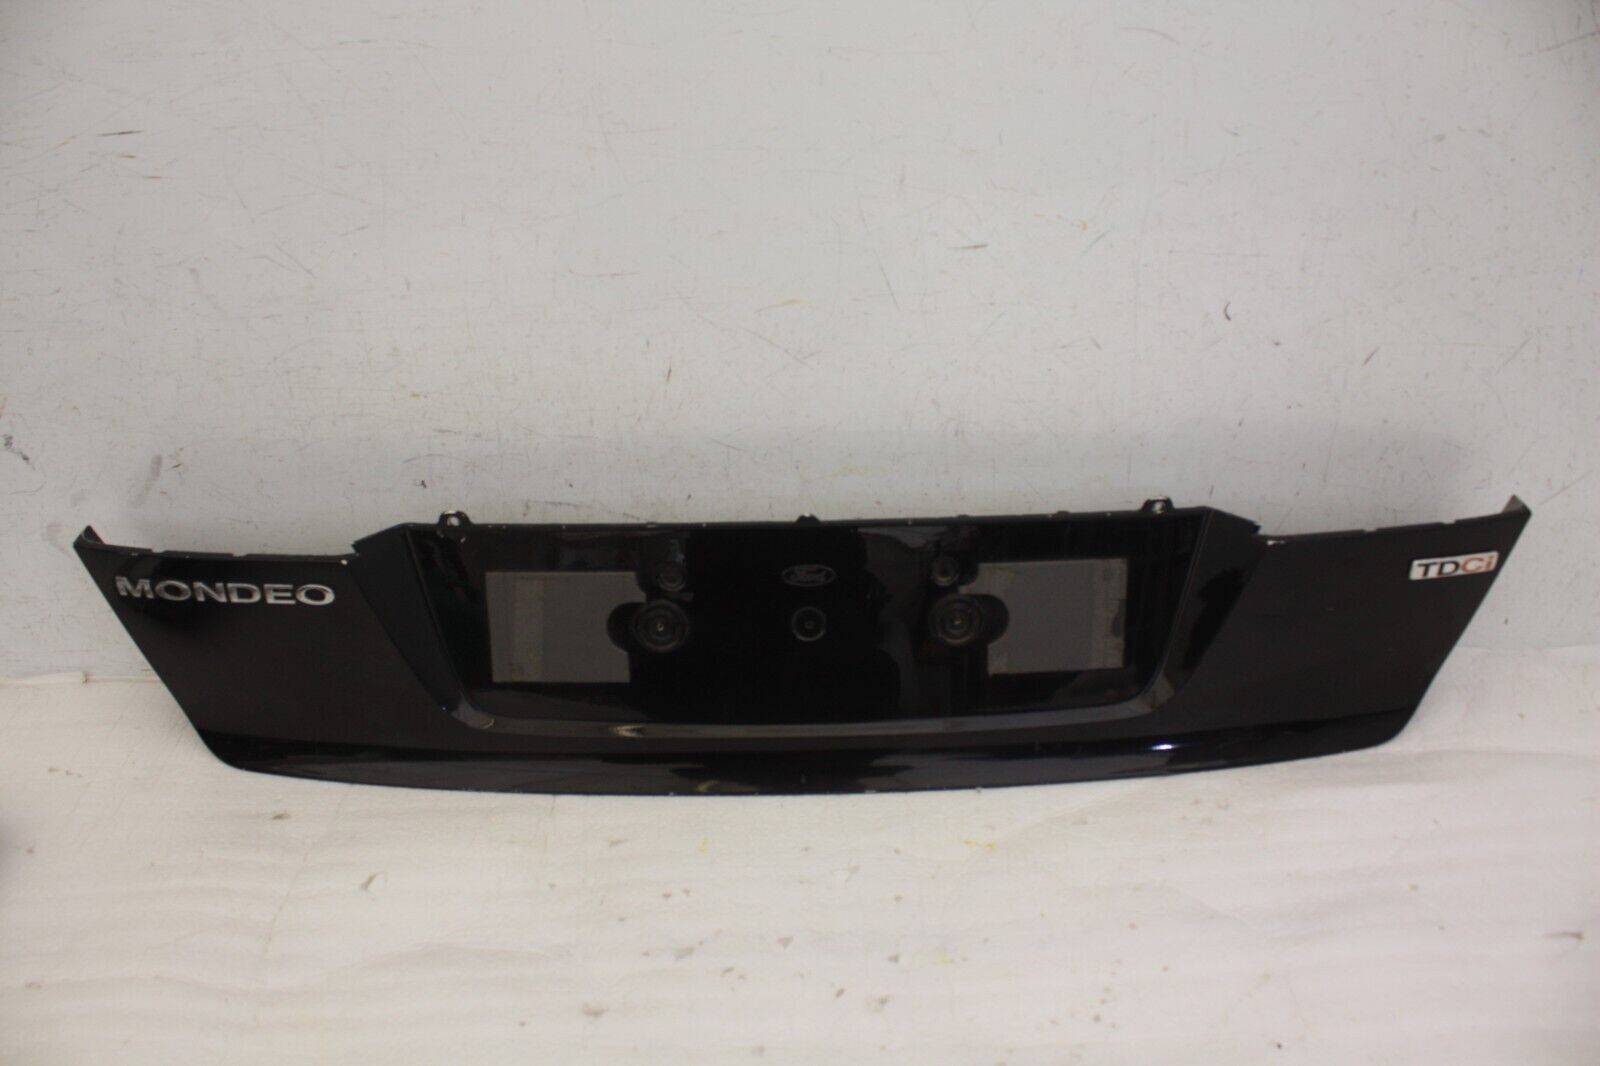 Ford Mondeo Rear Tailgate Lower Section 7S71 A423A40 A Genuine 176390241999